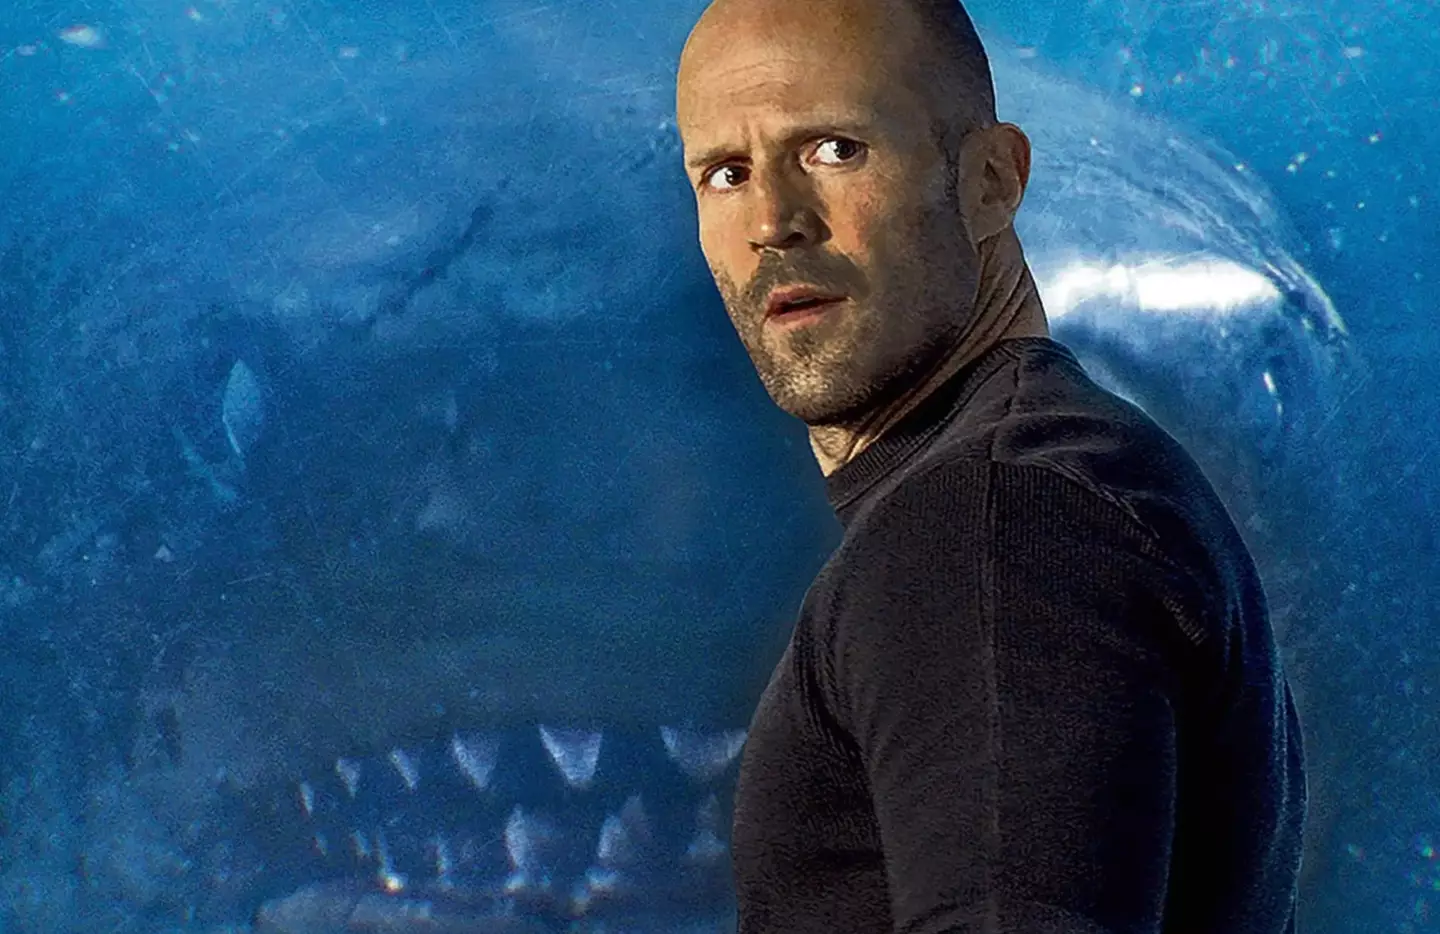 If the Meg did come back, only one man could save us.